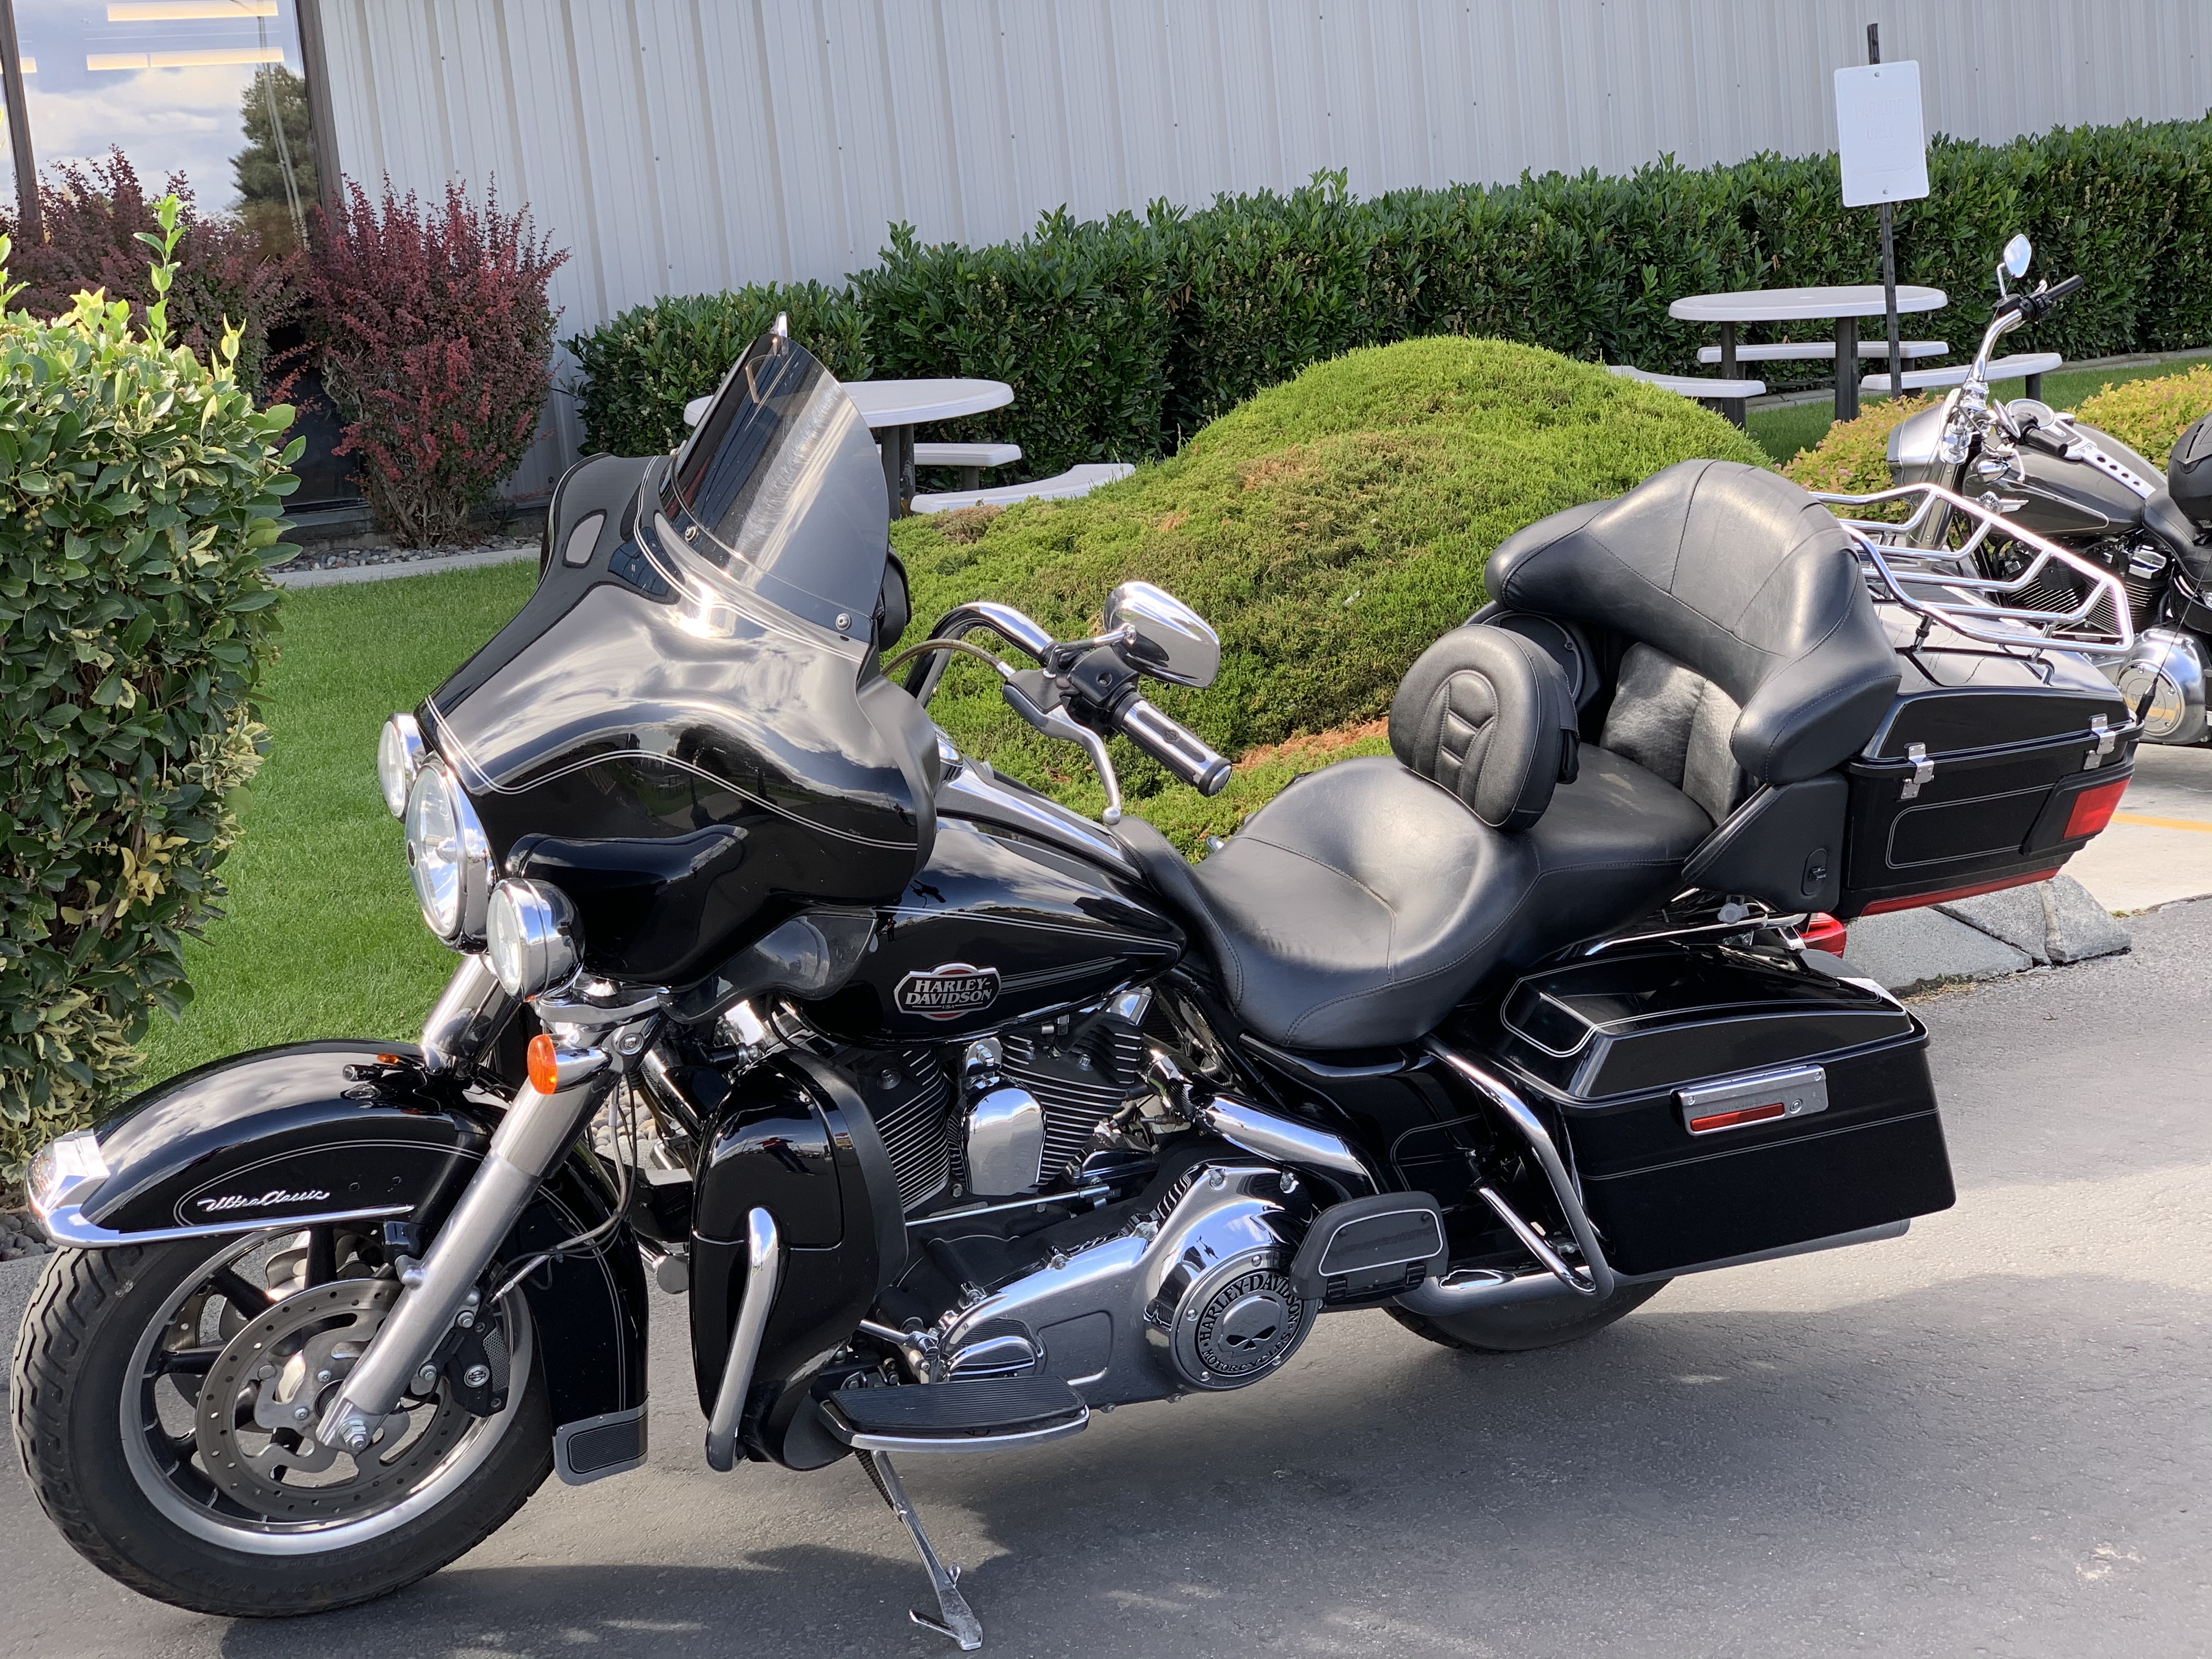 Pre-Owned 2008 Harley-Davidson Electra Glide Ultra Classic in Kennewick ...